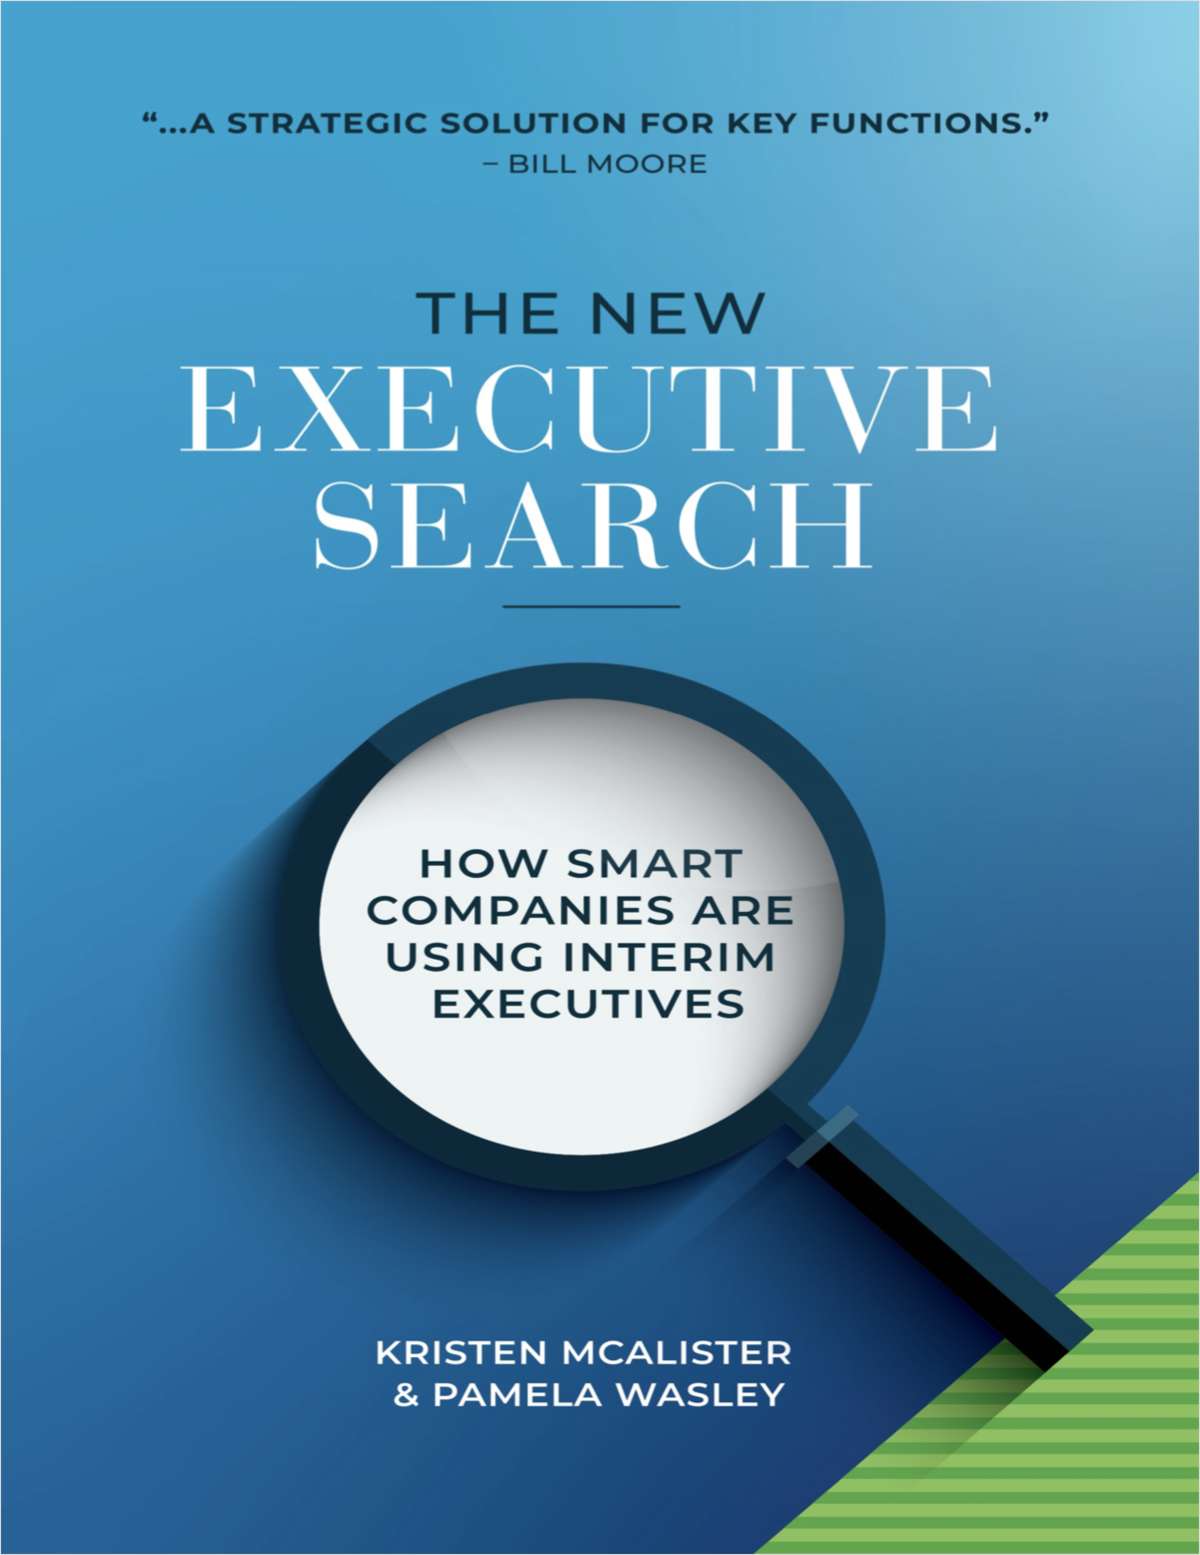 The New Executive Search